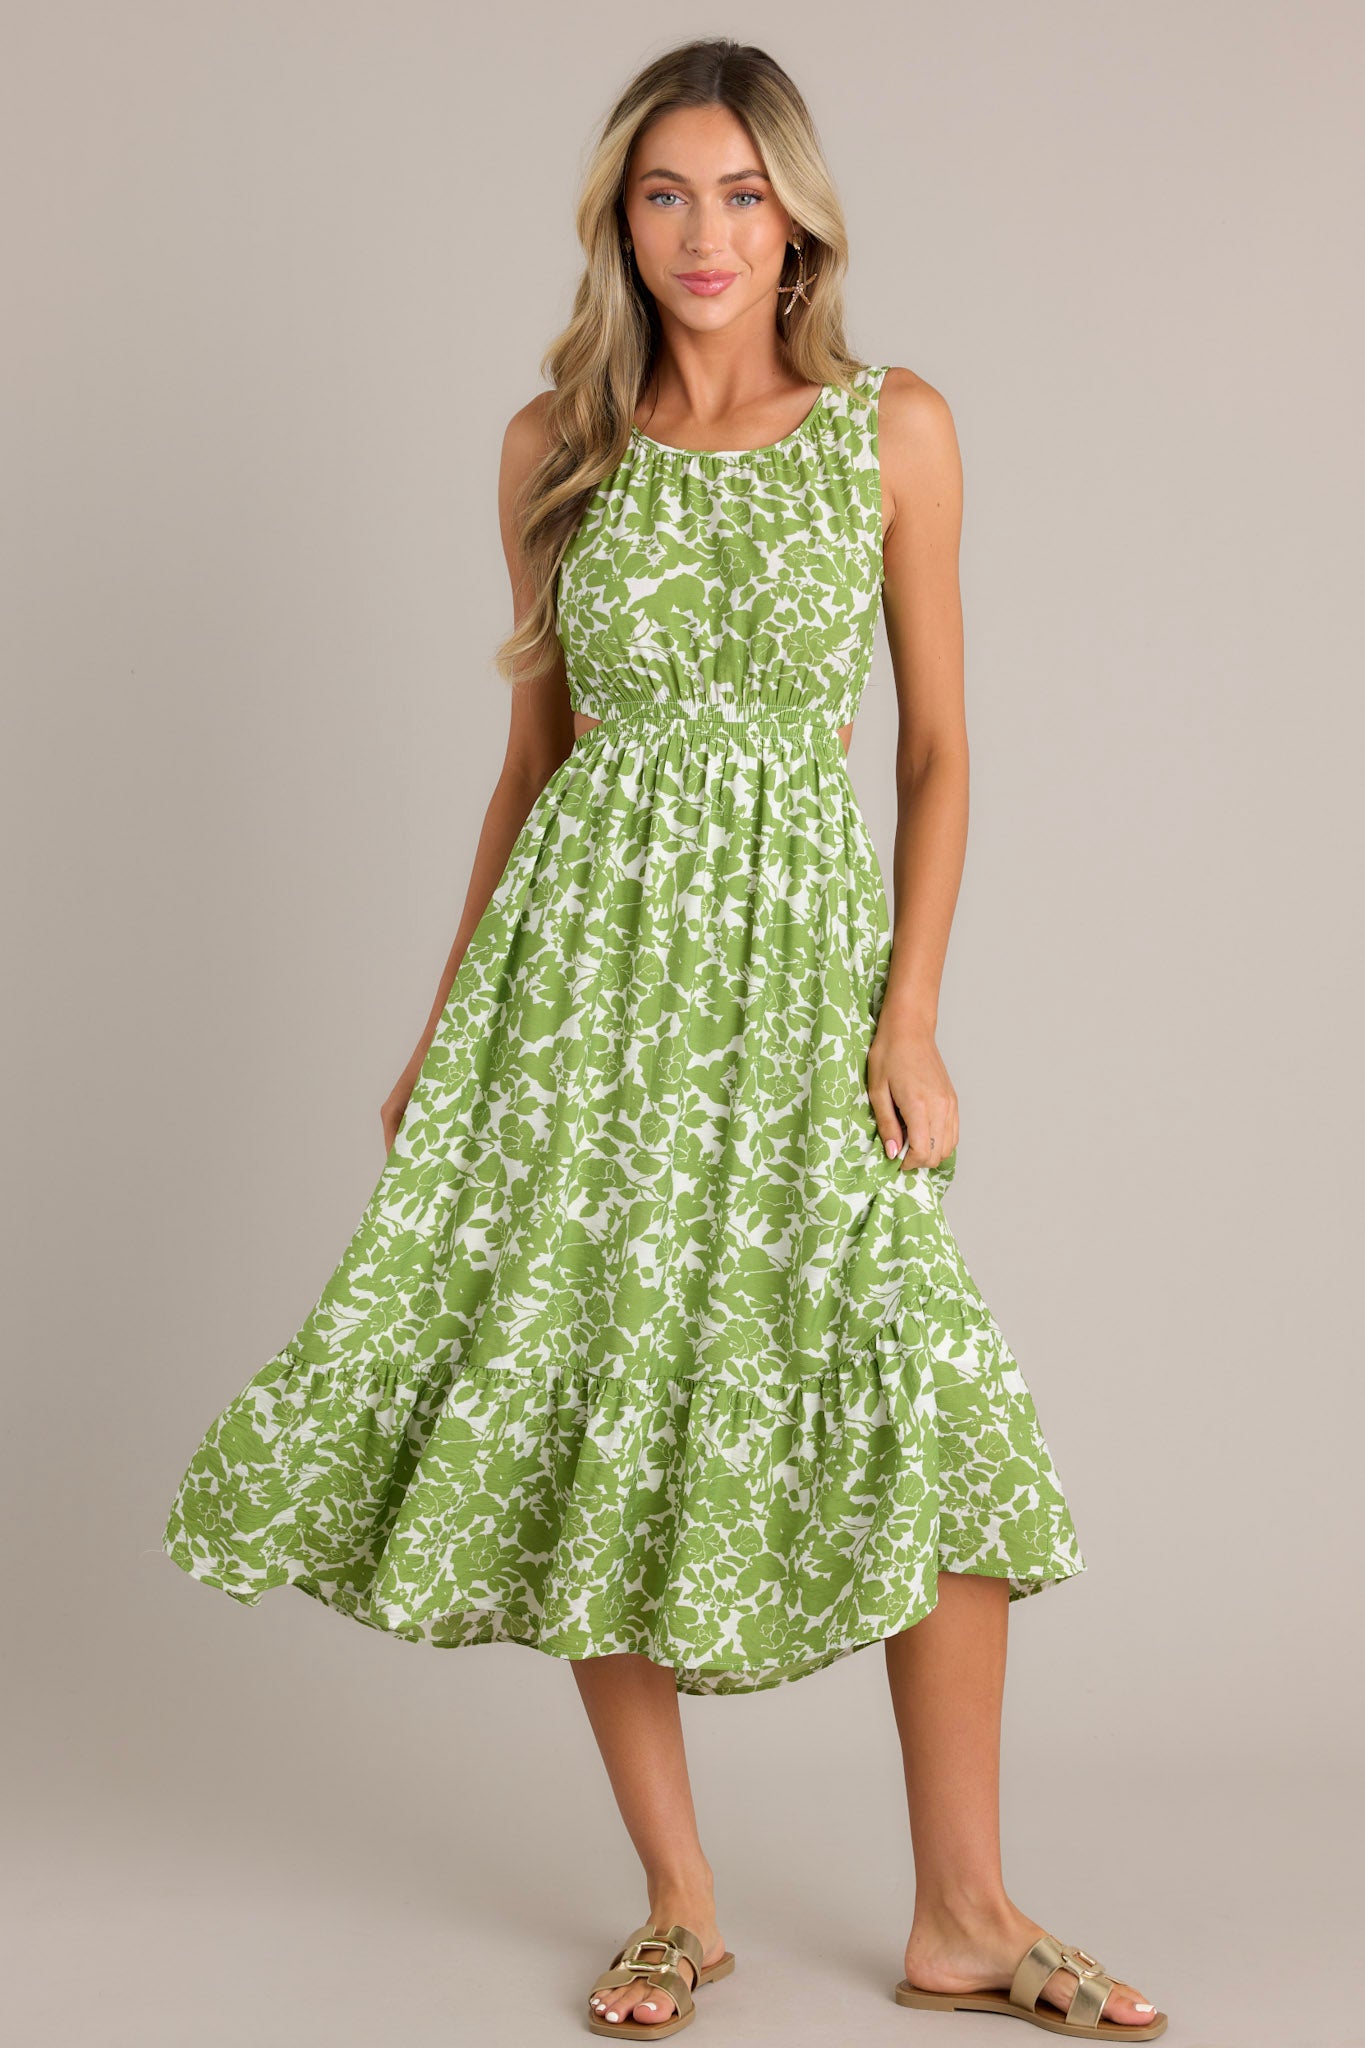 Front view of a model wearing a green and white floral print sleeveless dress with side cutouts, a gathered waist, and a tiered skirt.